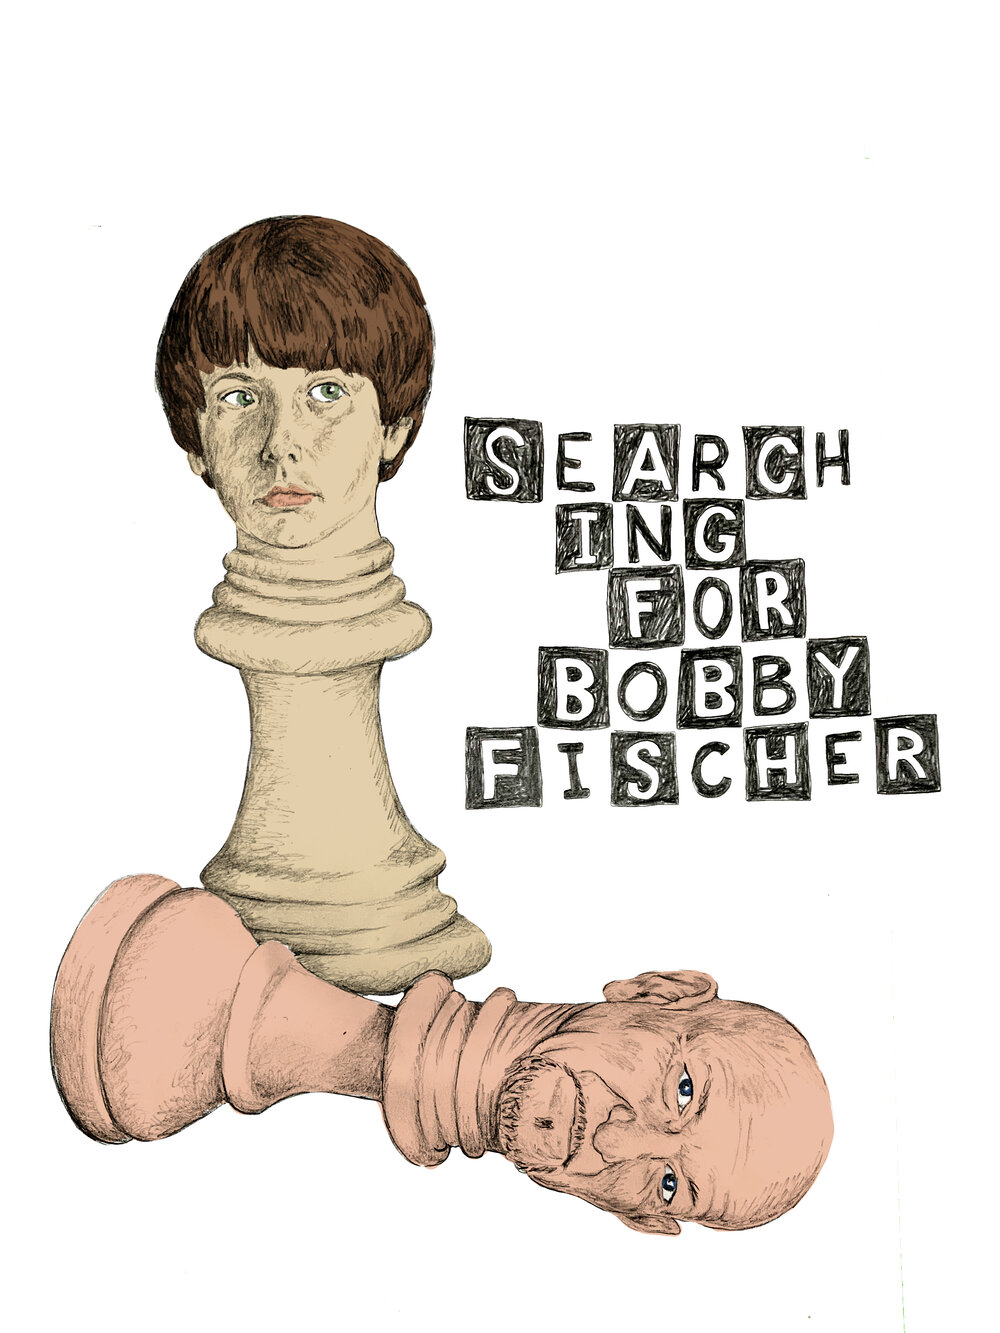 ModestGeniusXL: Not Searching for Bobby Fischer Anymore